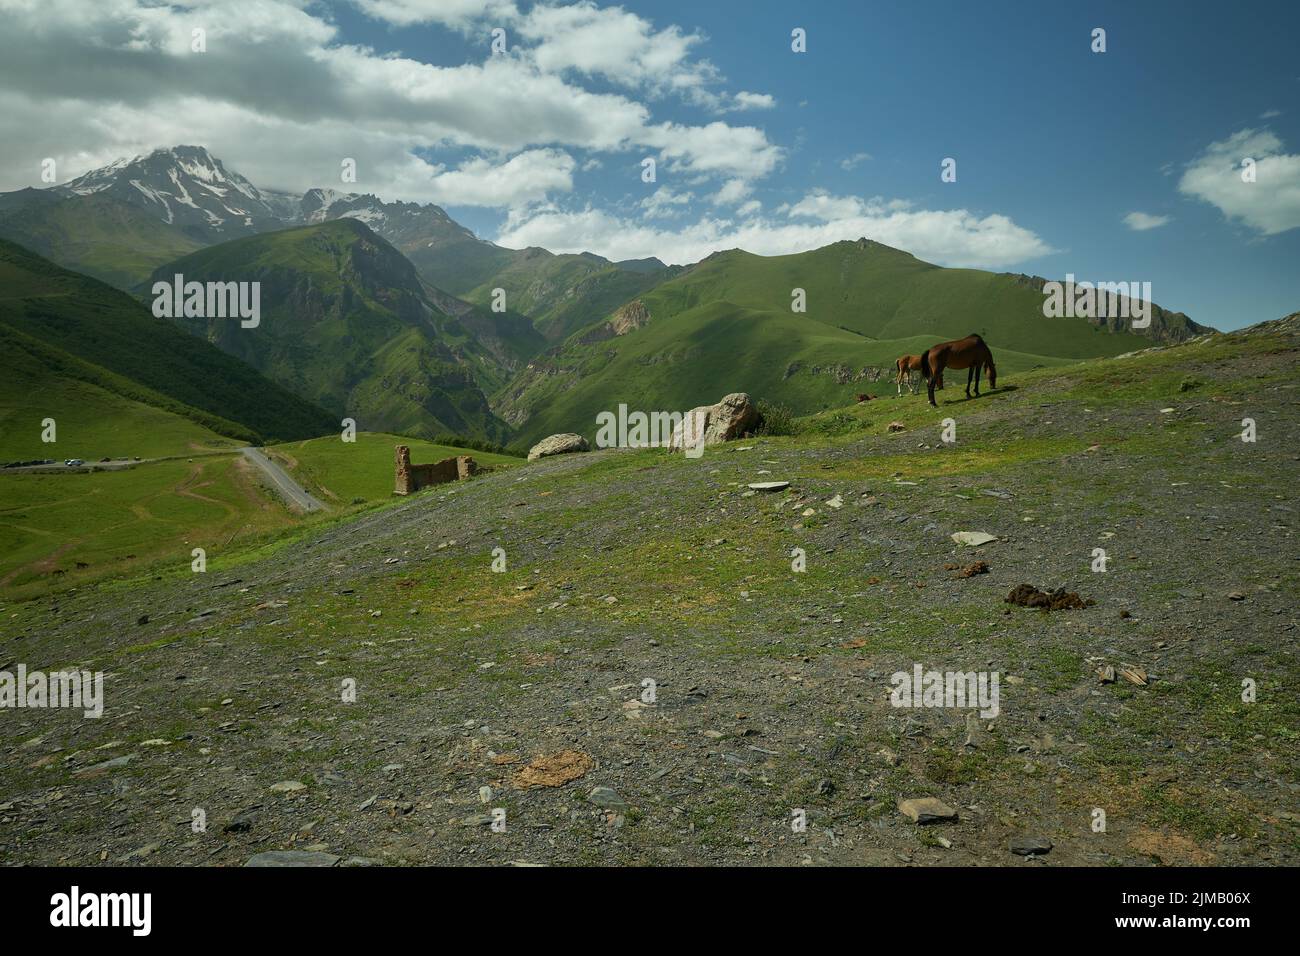 Mount Kazbek or Mount Kazbegi in Stepantsminda, Georgia daylight summer view with  wild horses in foreground and clouds in the sky in background Stock Photo